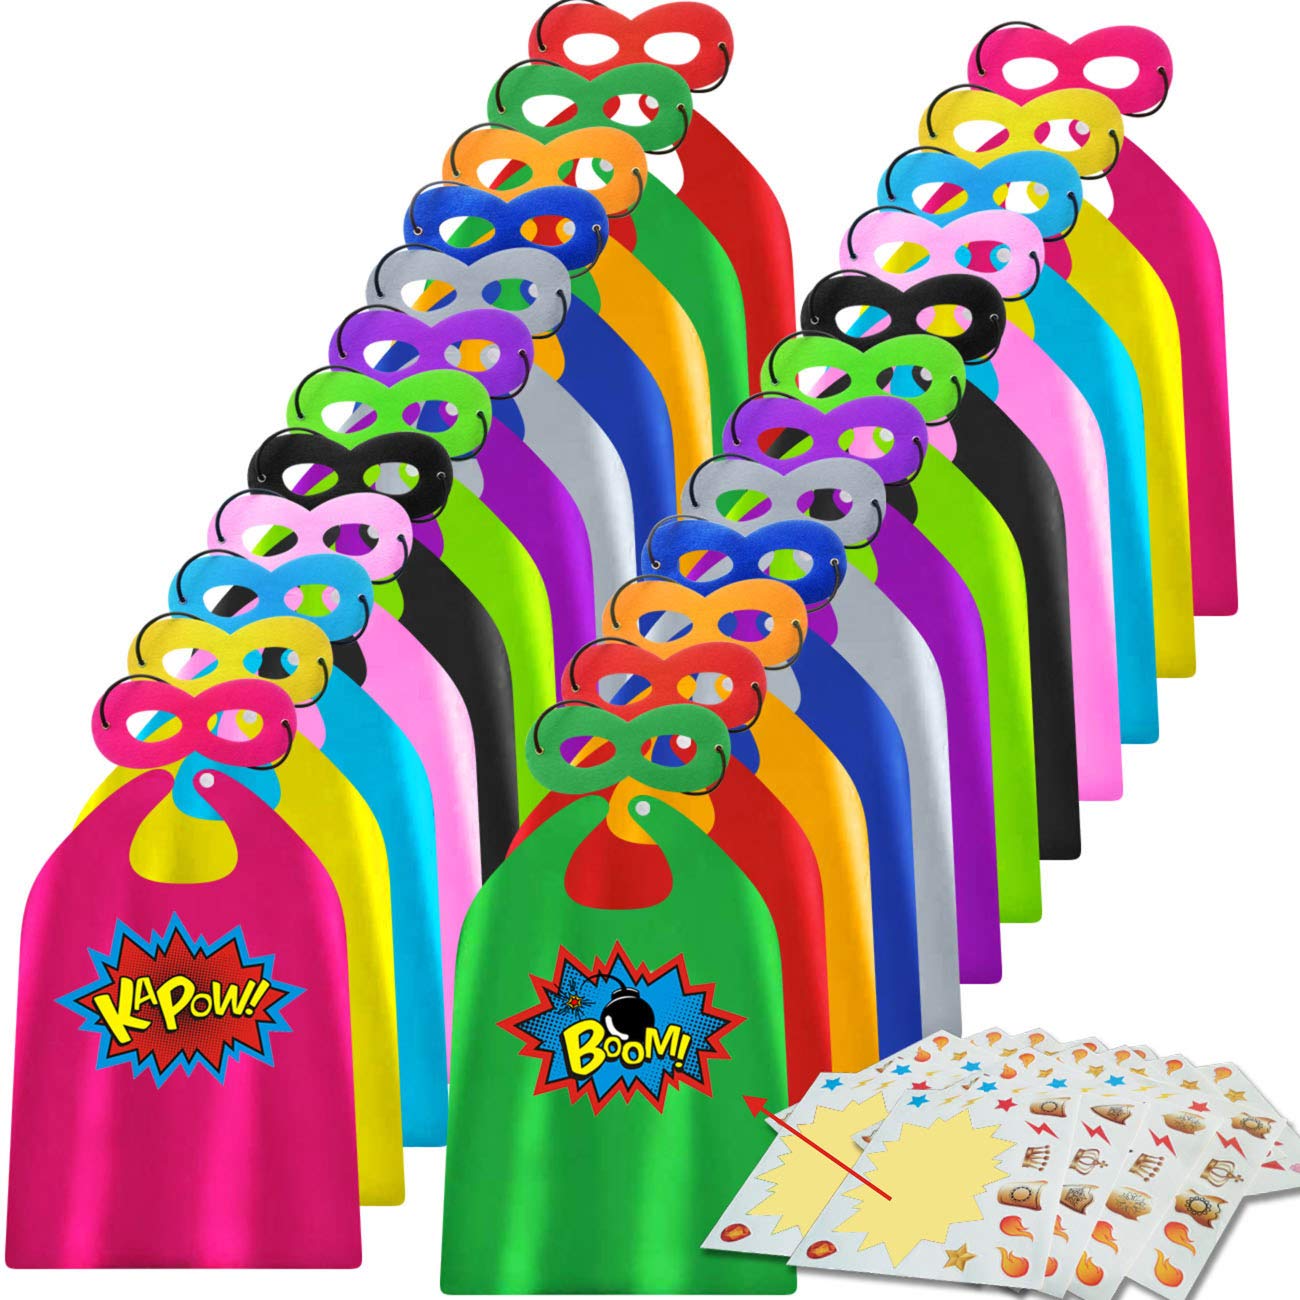 ADJOY Superhero Capes and Masks 24 Sets for Kids with Superhero Stickers Decoration - Superhero Themed Birthday Party Capes